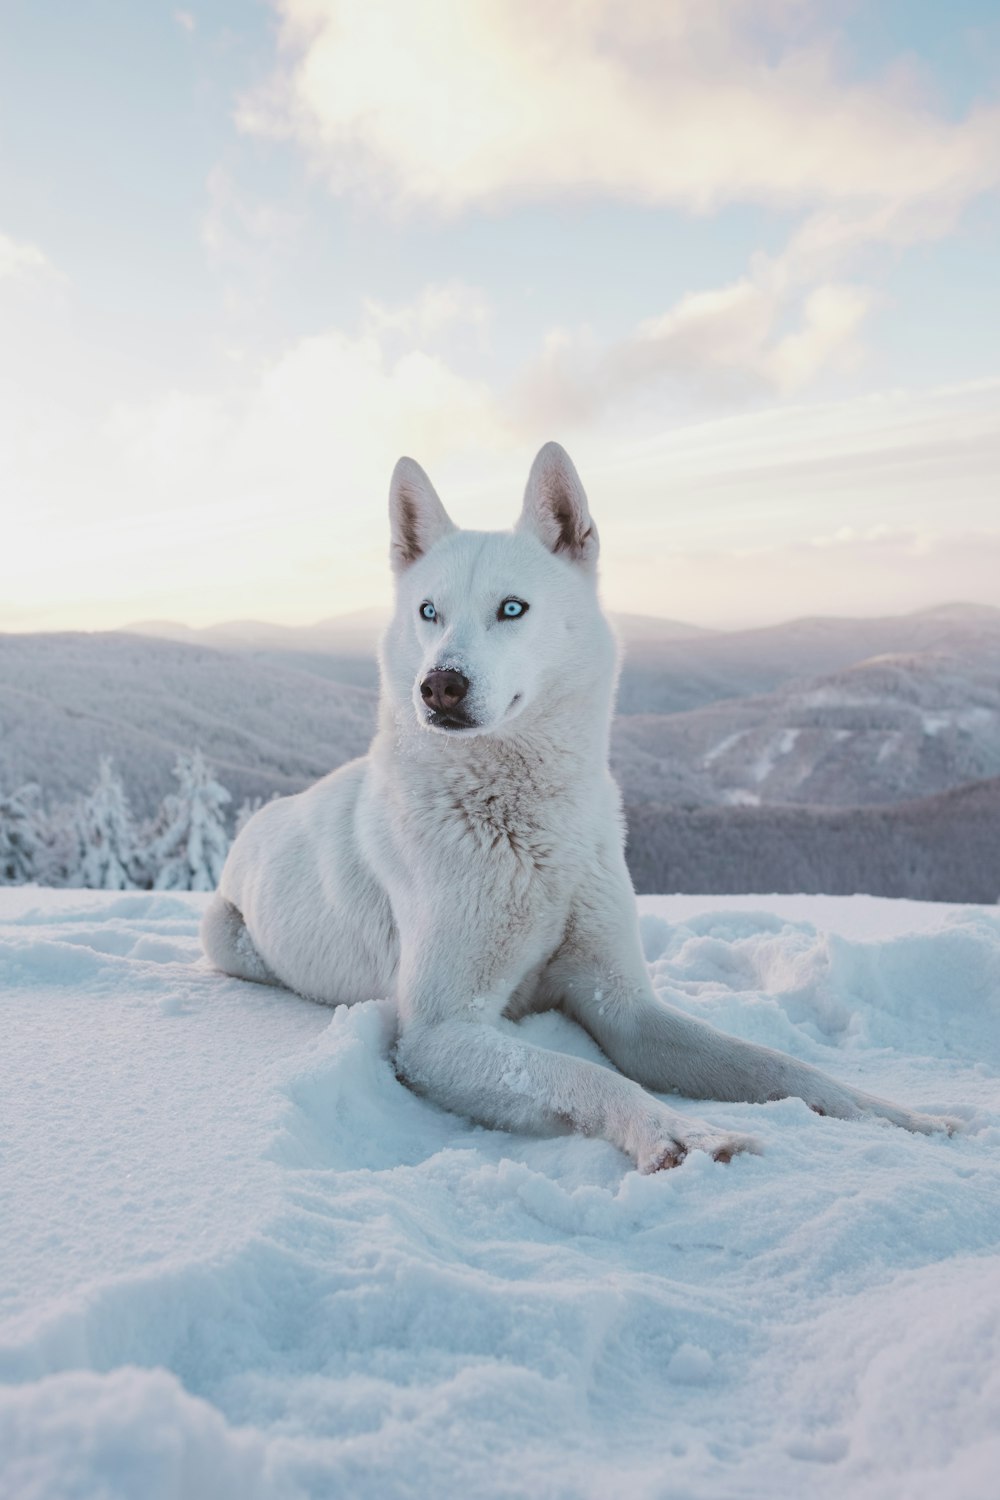 Wolf Wallpapers Free Hd Download 500 Hq Unsplash A collection of the top 59 wolf desktop wallpapers and backgrounds available for download for free. wolf wallpapers free hd download 500